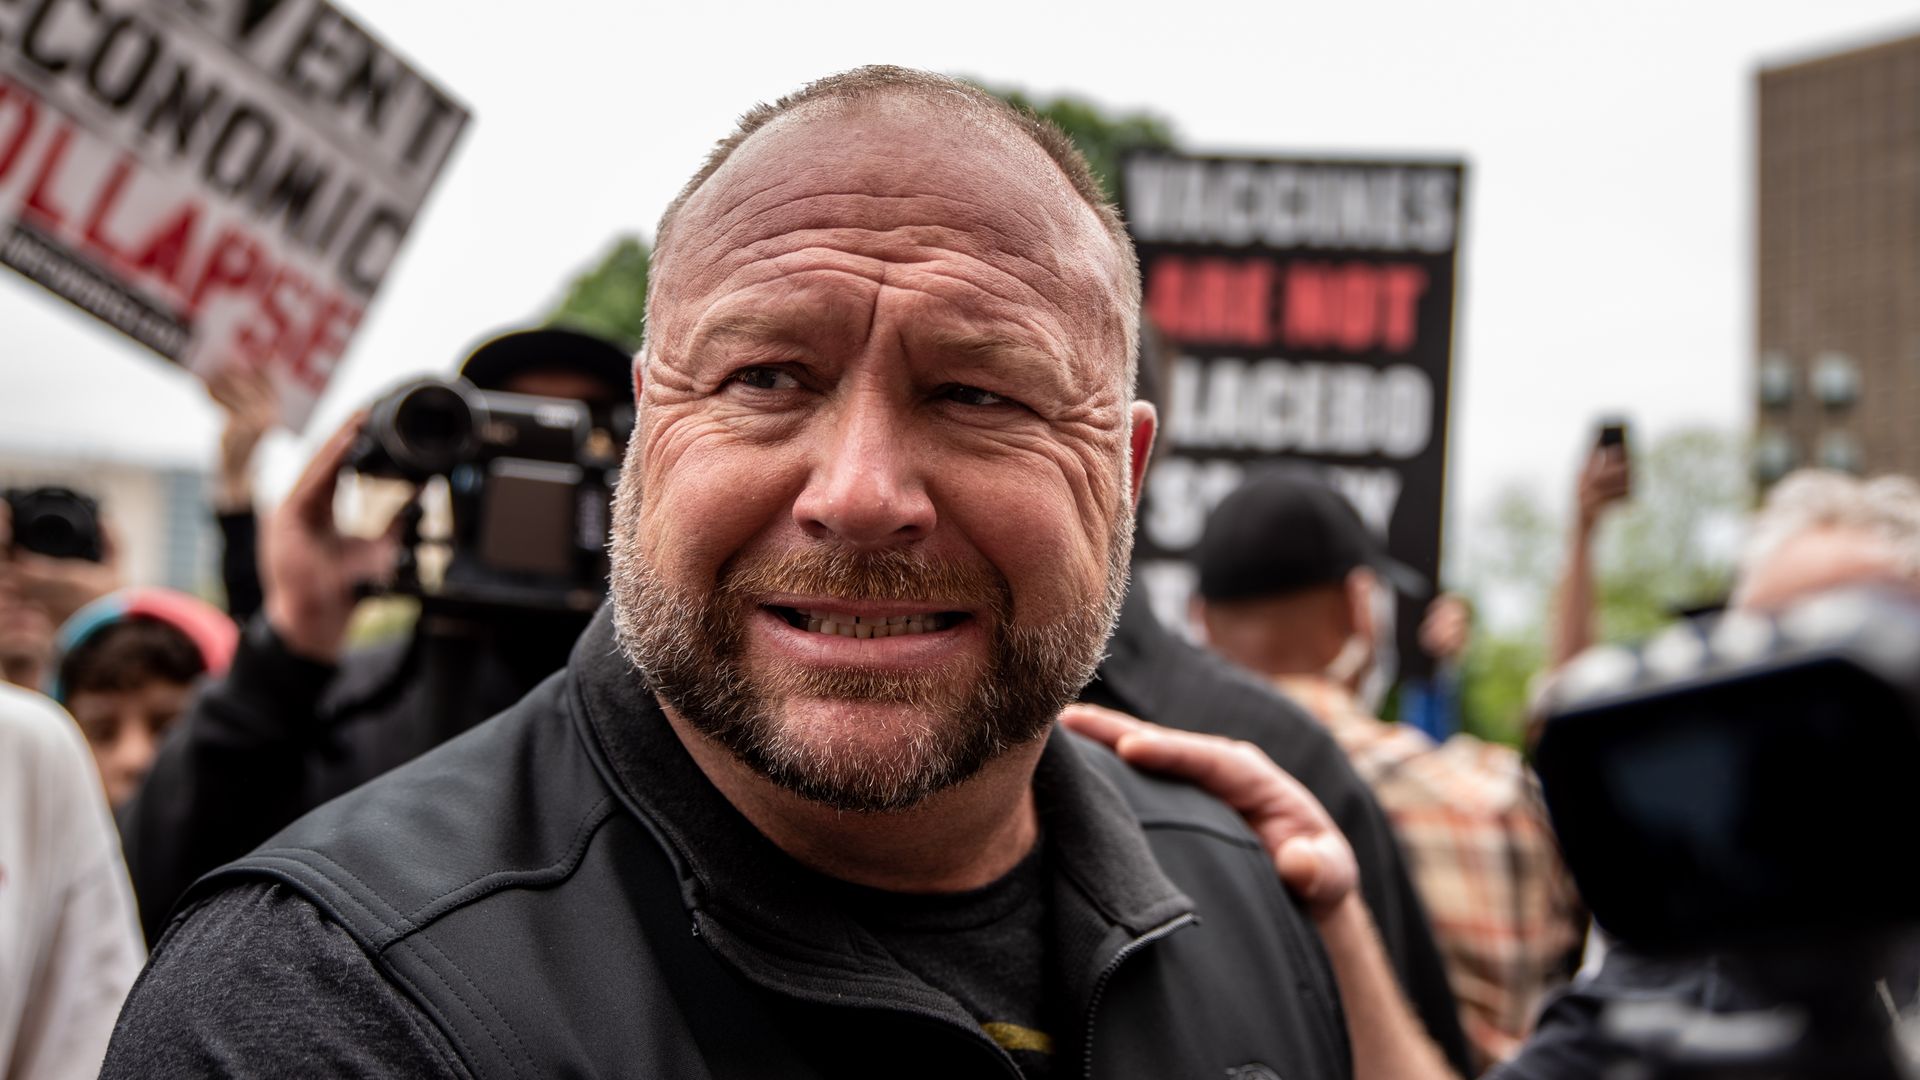 Infowars founder Alex Jones interacts with supporters at the Texas State Capital building on April 18, 2020 in Austin, Texas. 